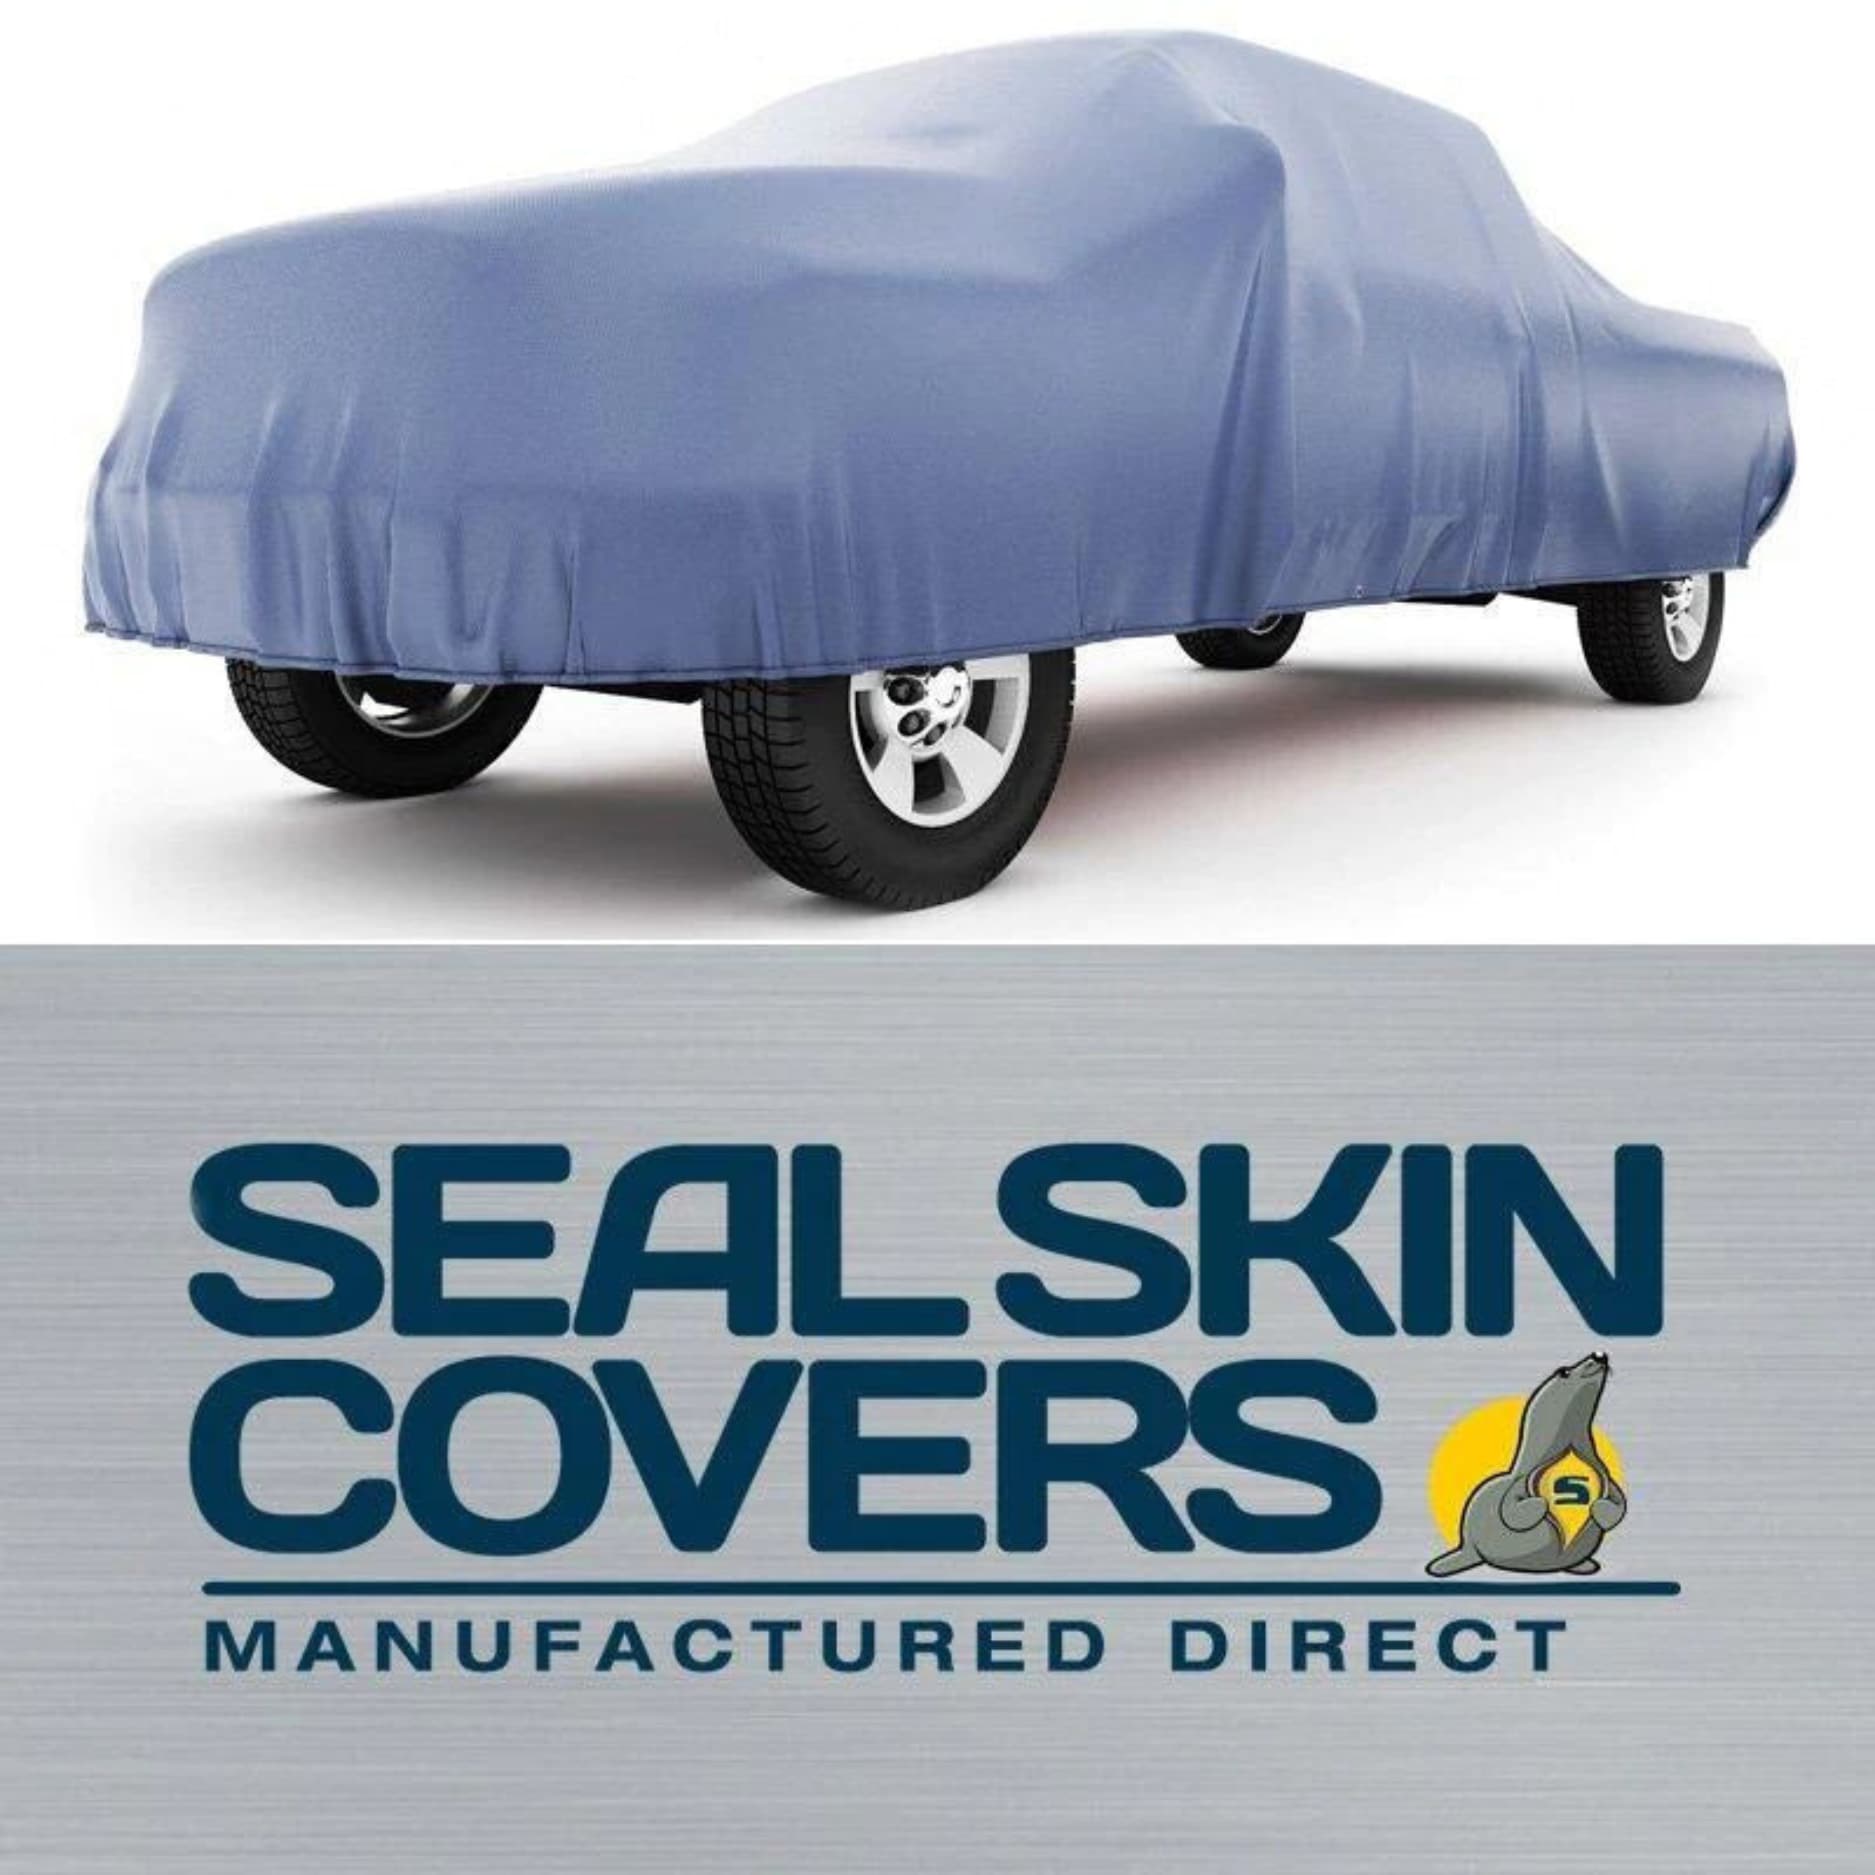 Seal Skin Covers Waterproof Indoor/Outdoor Truck Car Cover - Black, Lining,  Universal Fit, SEAL-TEC Technology in the Universal Car Covers department  at